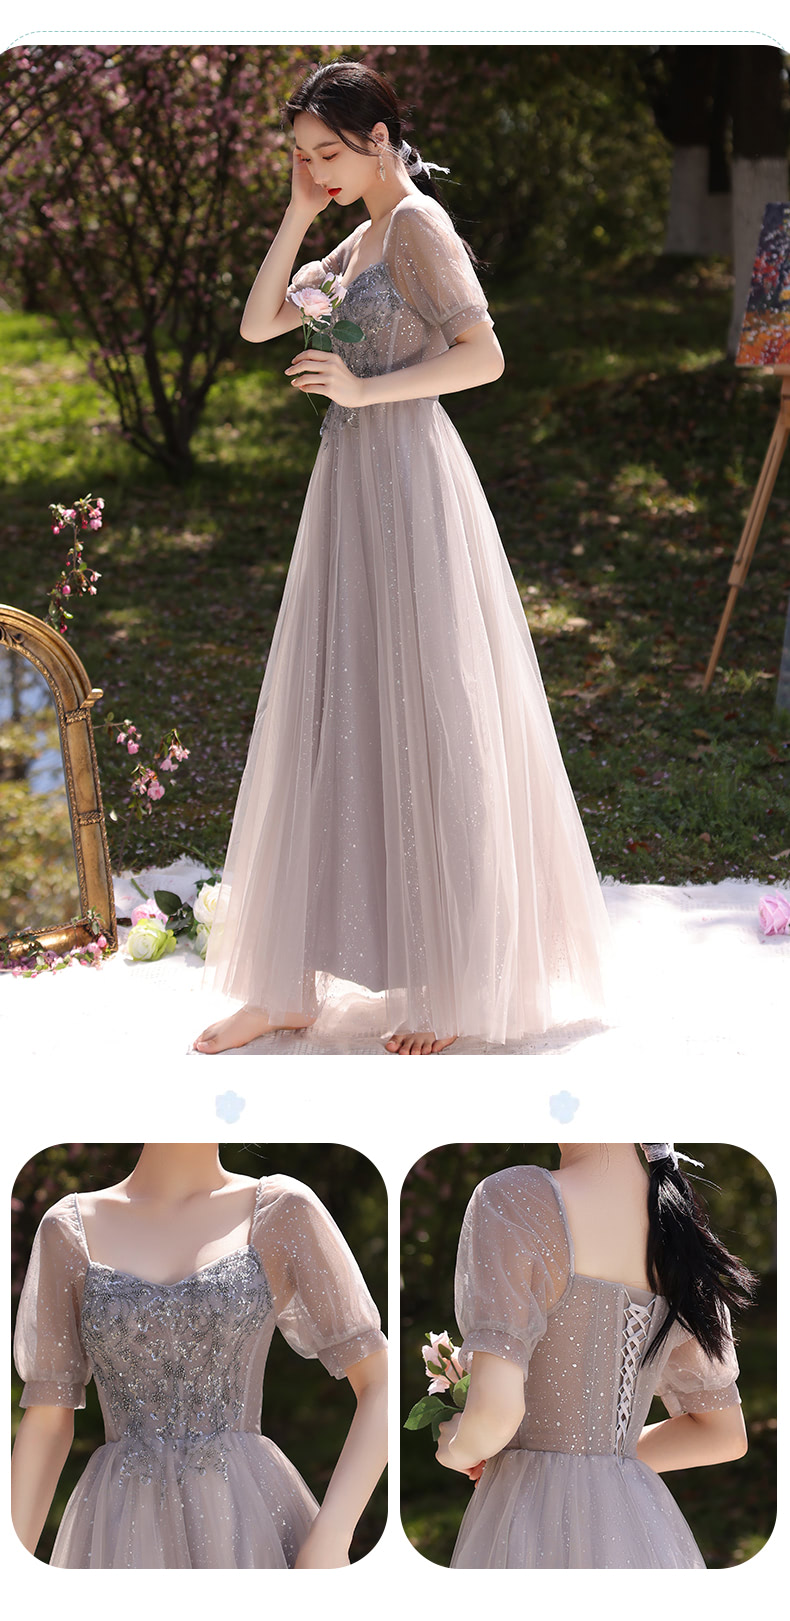 A-Line-Gray-Bridesmaid-Long-Dress-Lace-Floral-Embroidery-Party-Gown18.jpg